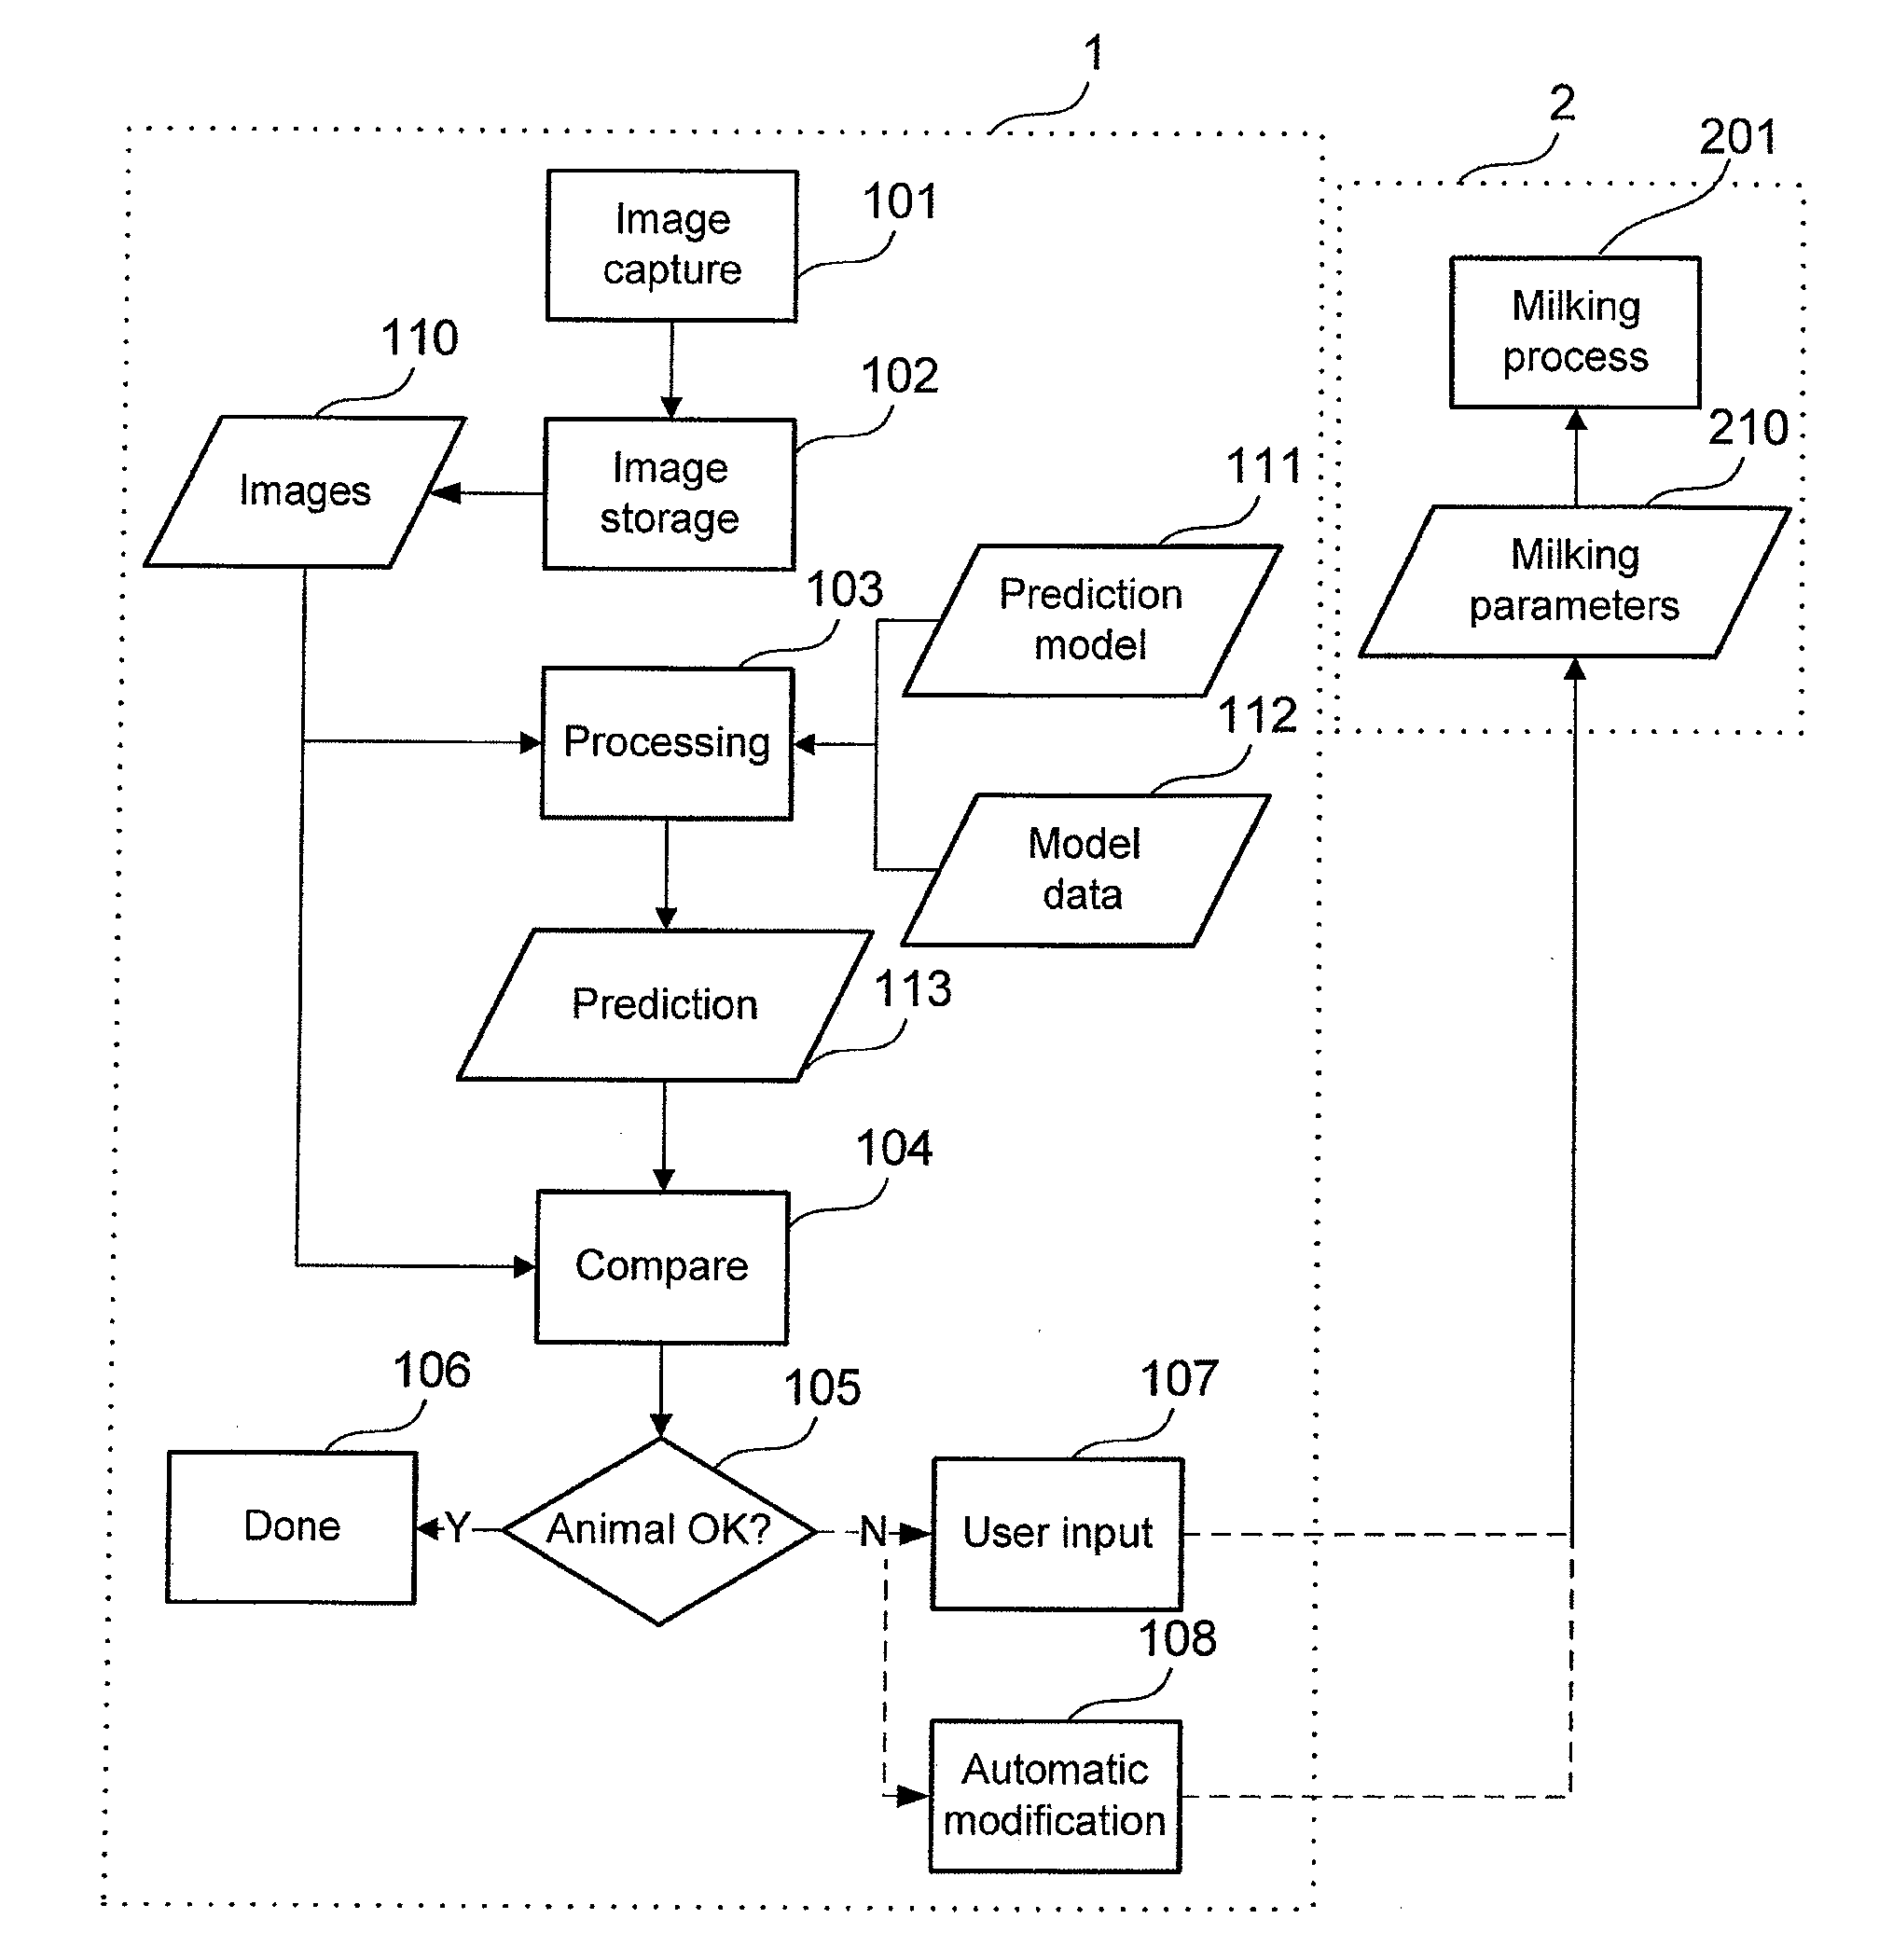 System and a Method for Controlling an Automatic Milking System